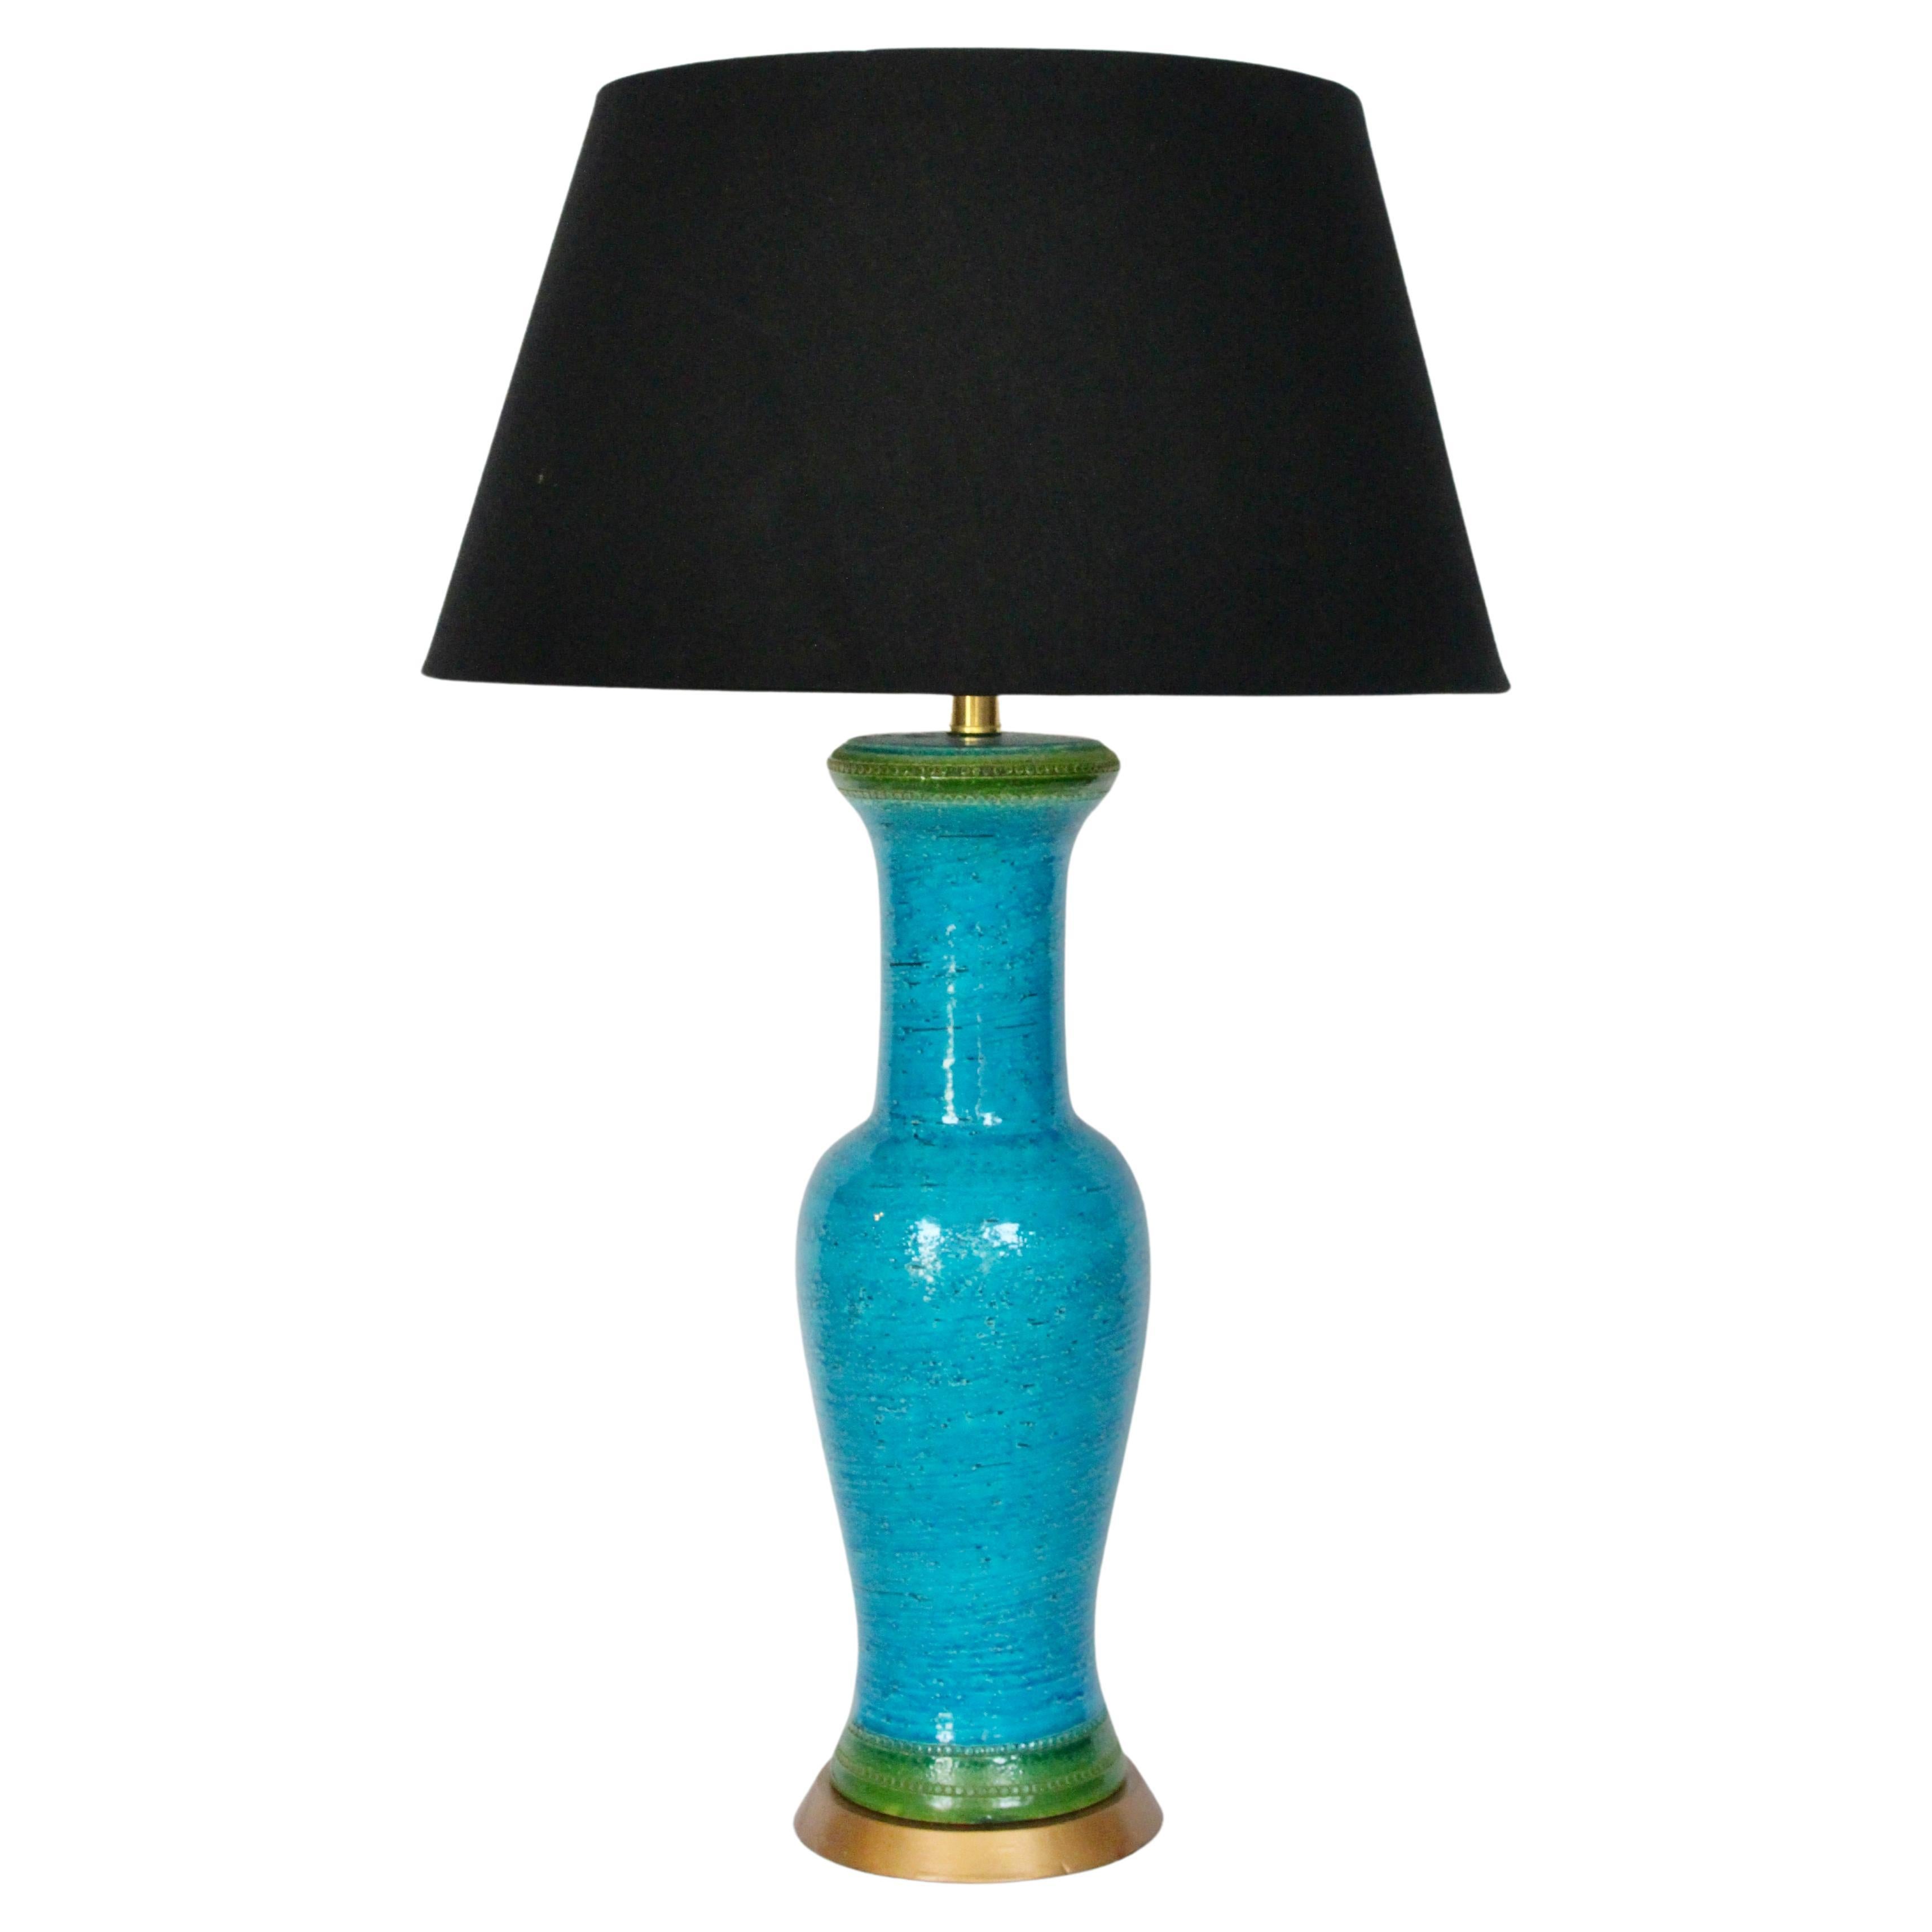 Substantial Aldo Londi Bitossi Turquoise with Top Green Stripe Table Lamp, 1950s For Sale